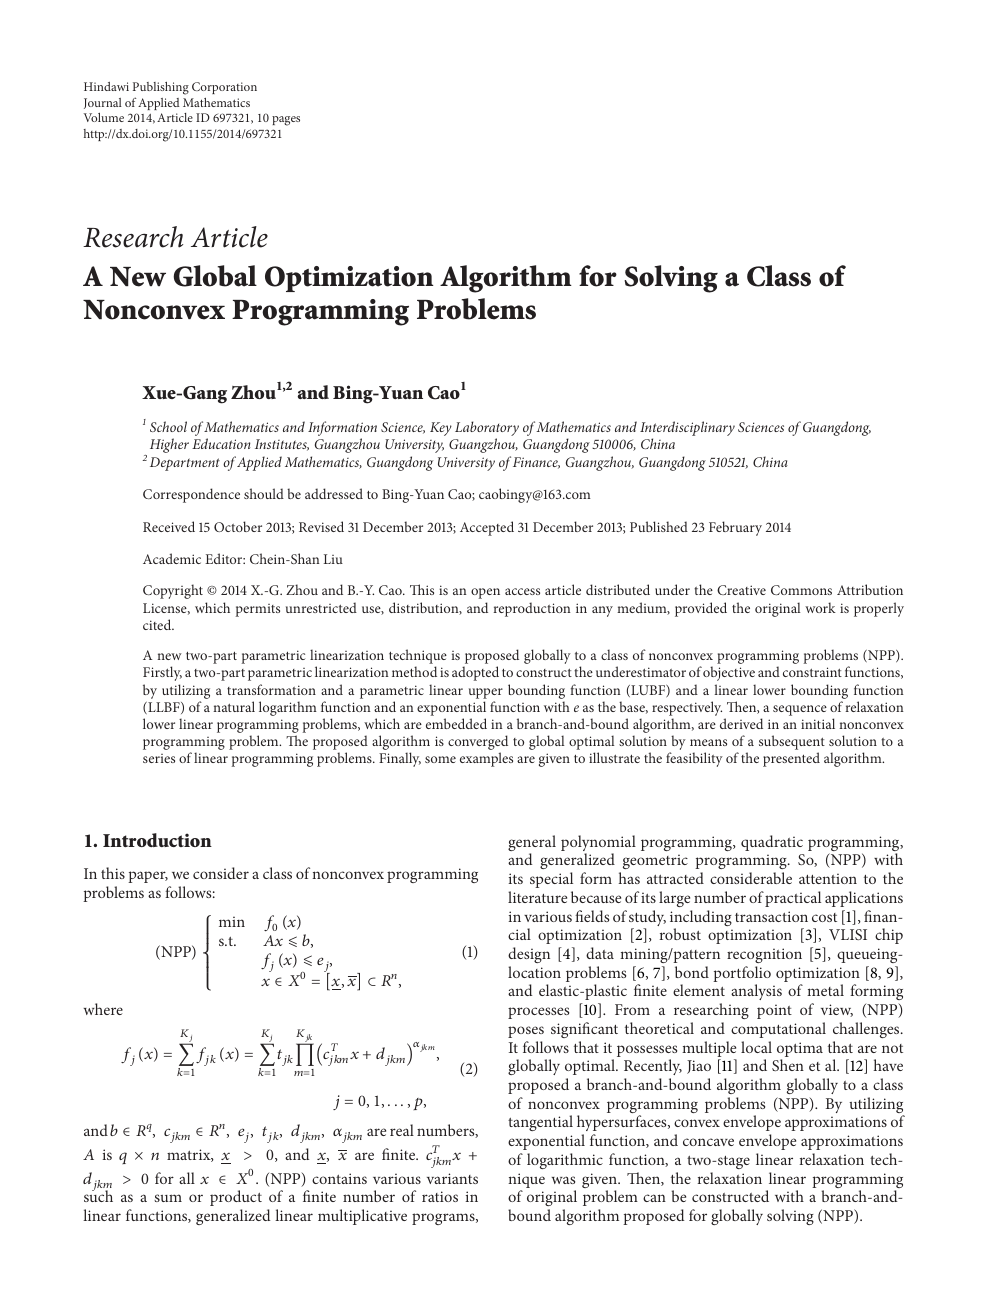 A New Global Optimization Algorithm For Solving A Class Of Nonconvex Programming Problems Topic Of Research Paper In Mathematics Download Scholarly Article Pdf And Read For Free On Cyberleninka Open Science